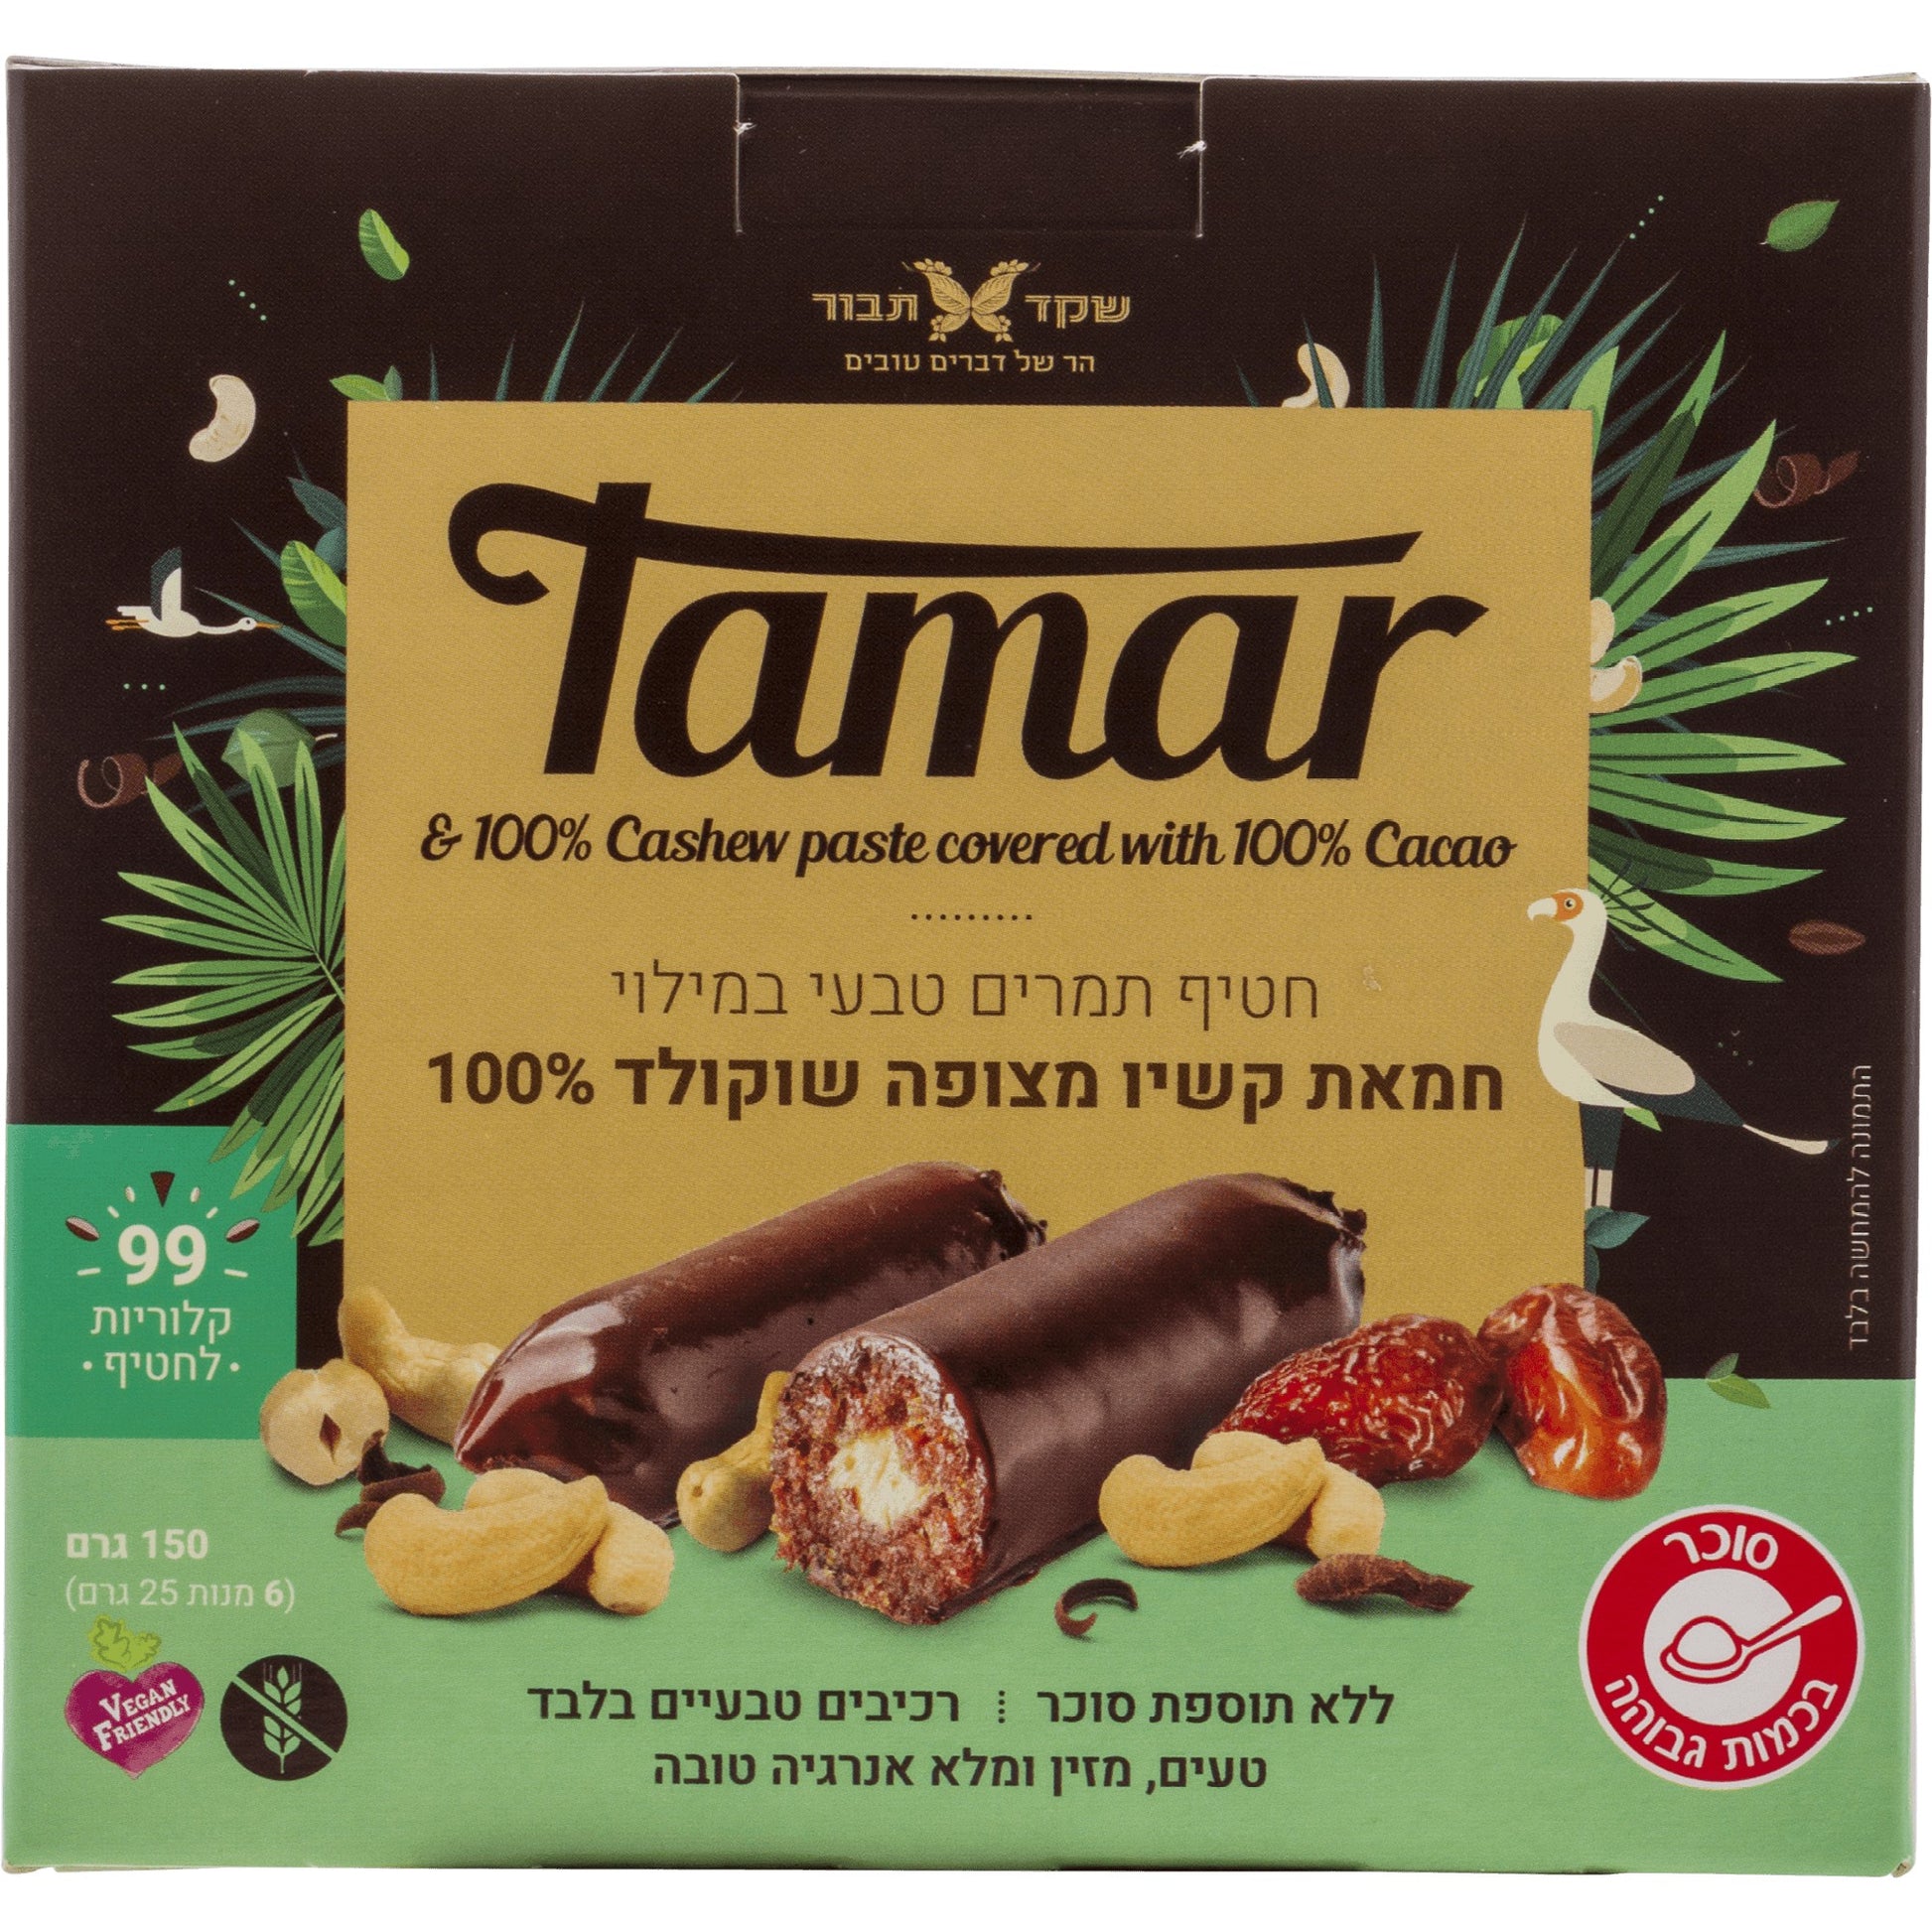 Tamar Dates with Cashew paste filling covered with 100% cacao 150 gr - Shaked Tavor - Israel Menu